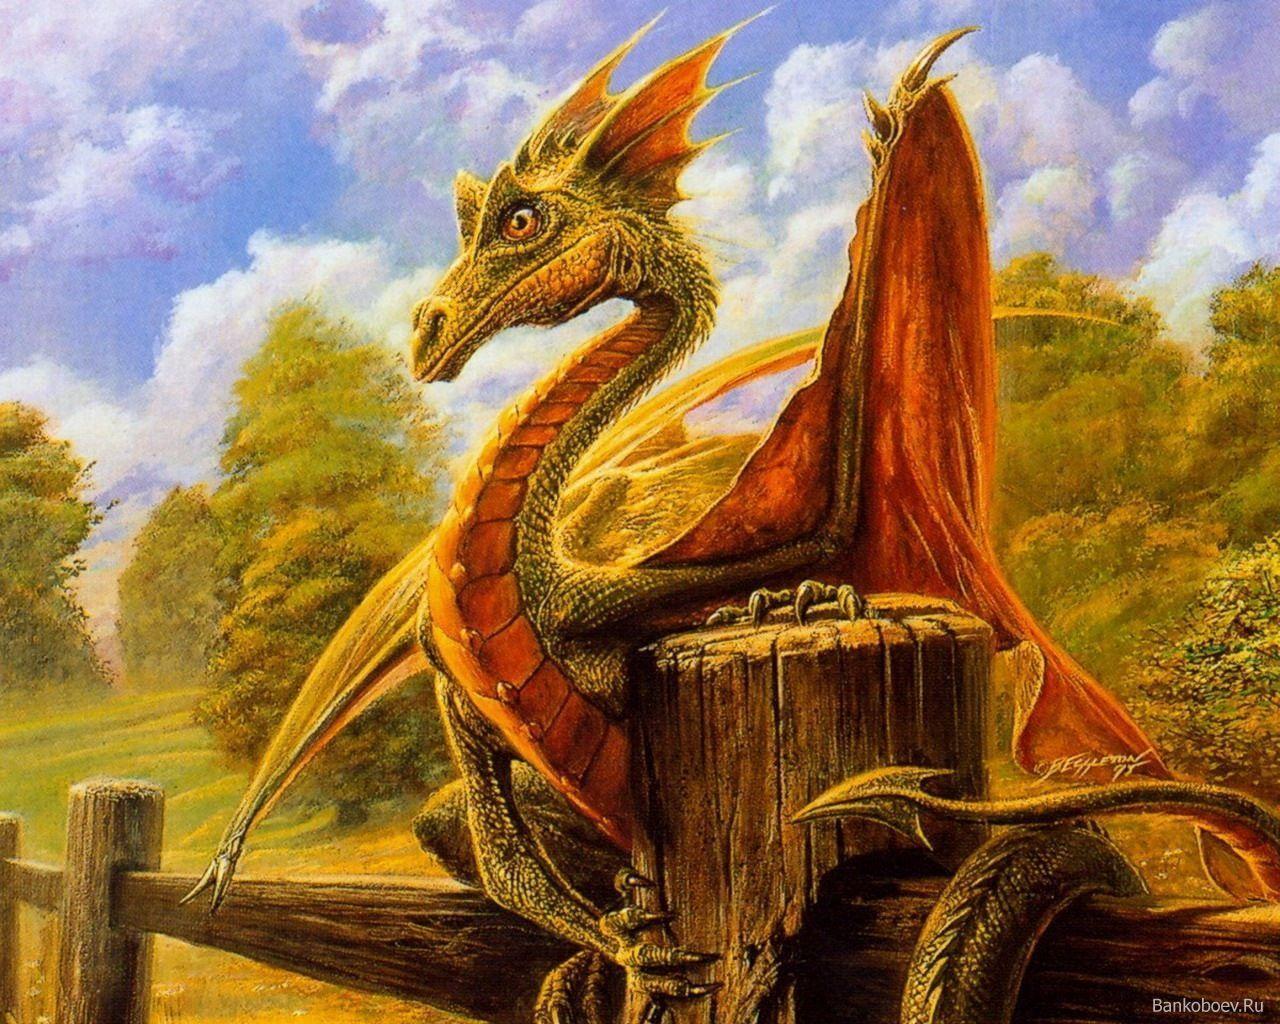  A green dragon sits on a wooden fence in a field, looking at a human.